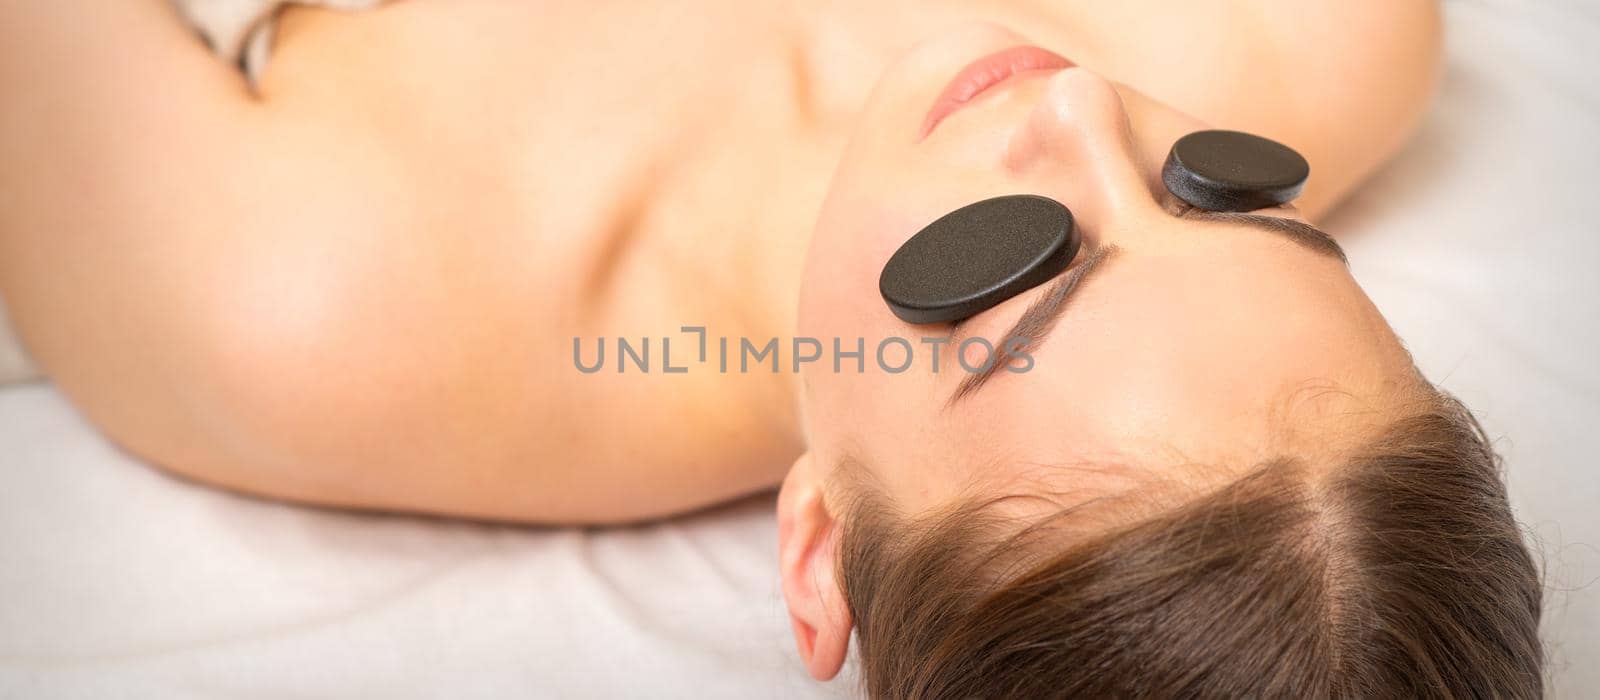 Massage with stones on the eyes of young woman getting a treatment in a beauty spa